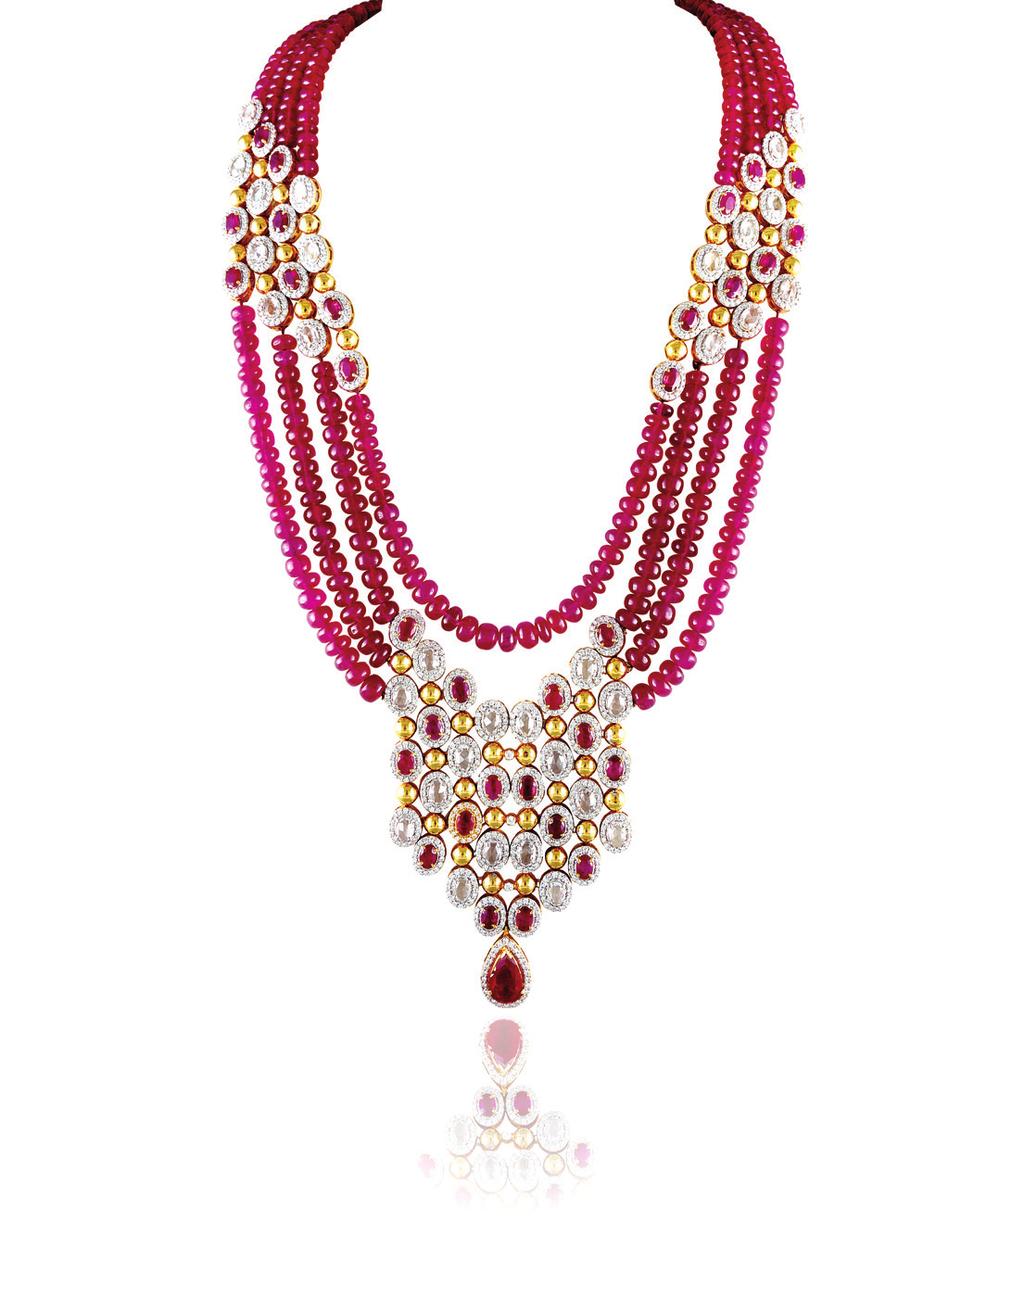 bride is, are trending. Set with a generous dollop of gemstones or only diamonds, these neckpieces spell modern luxury.